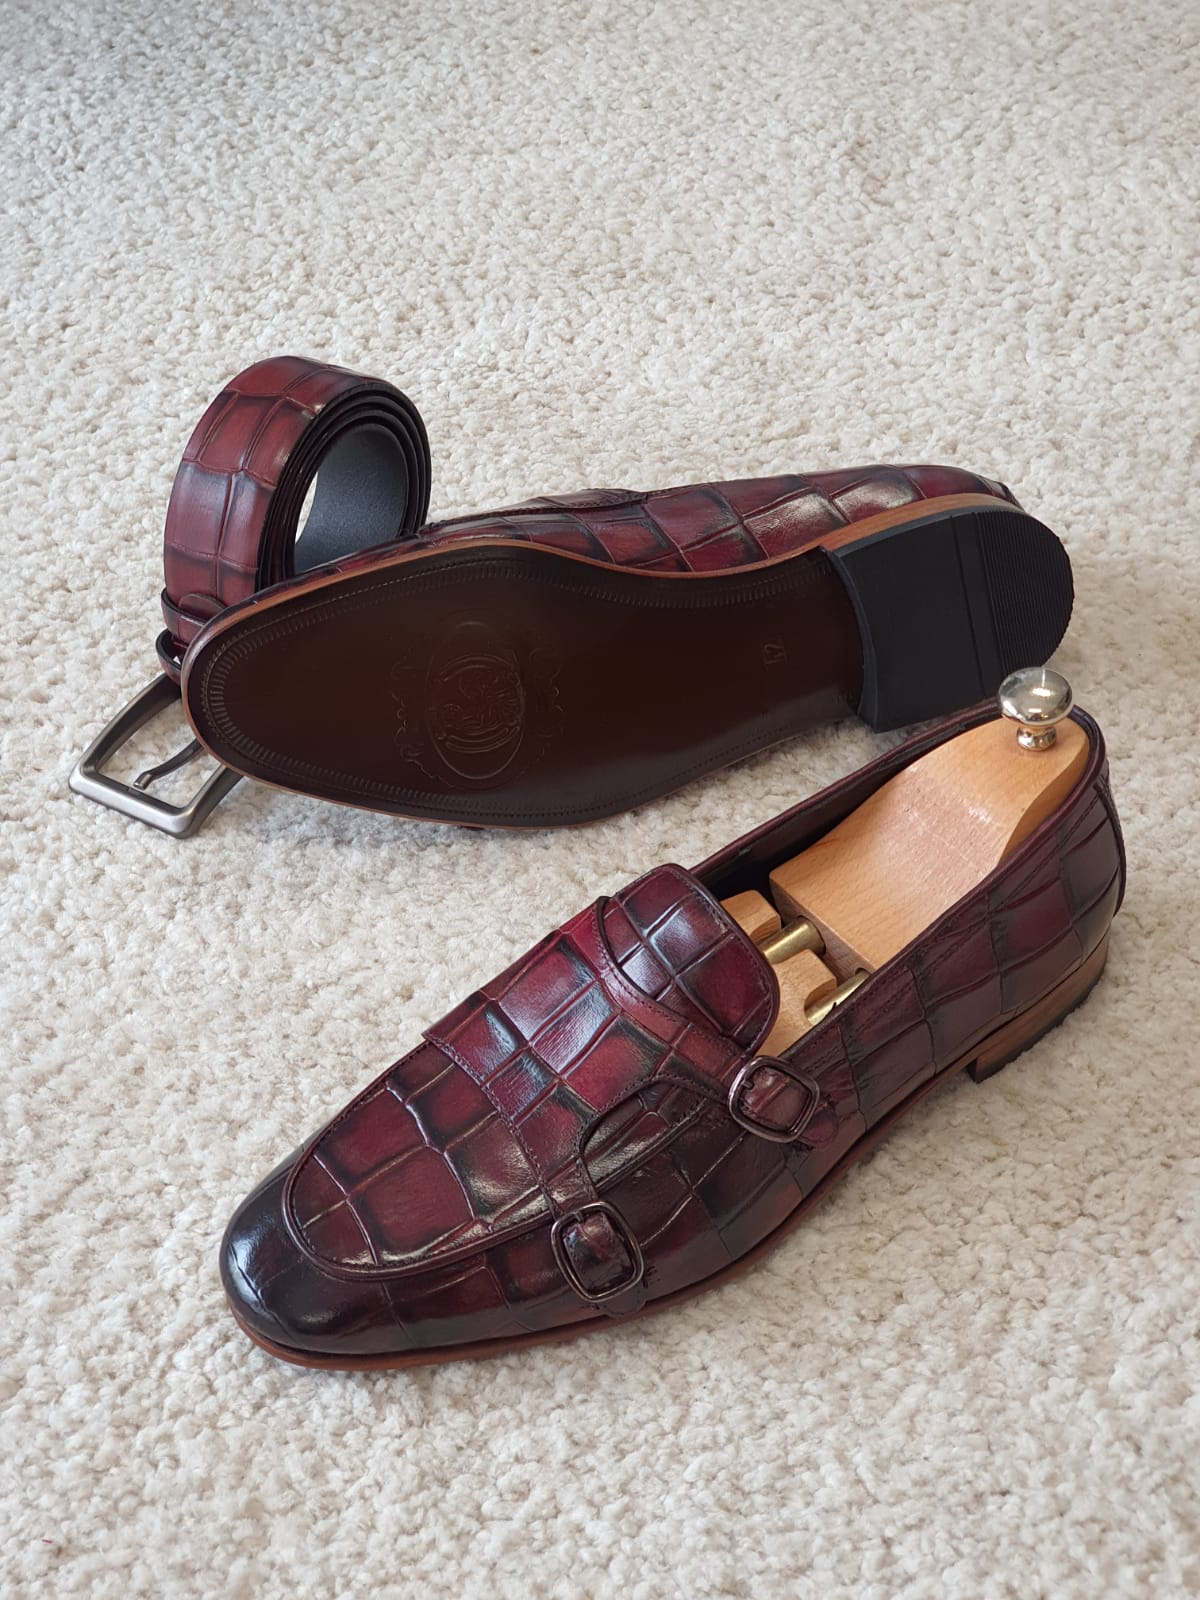 CLARET-RED SPECIAL EDITION* DOUBLE BUCKLE WITH CROCO LEATHER LOAFERS